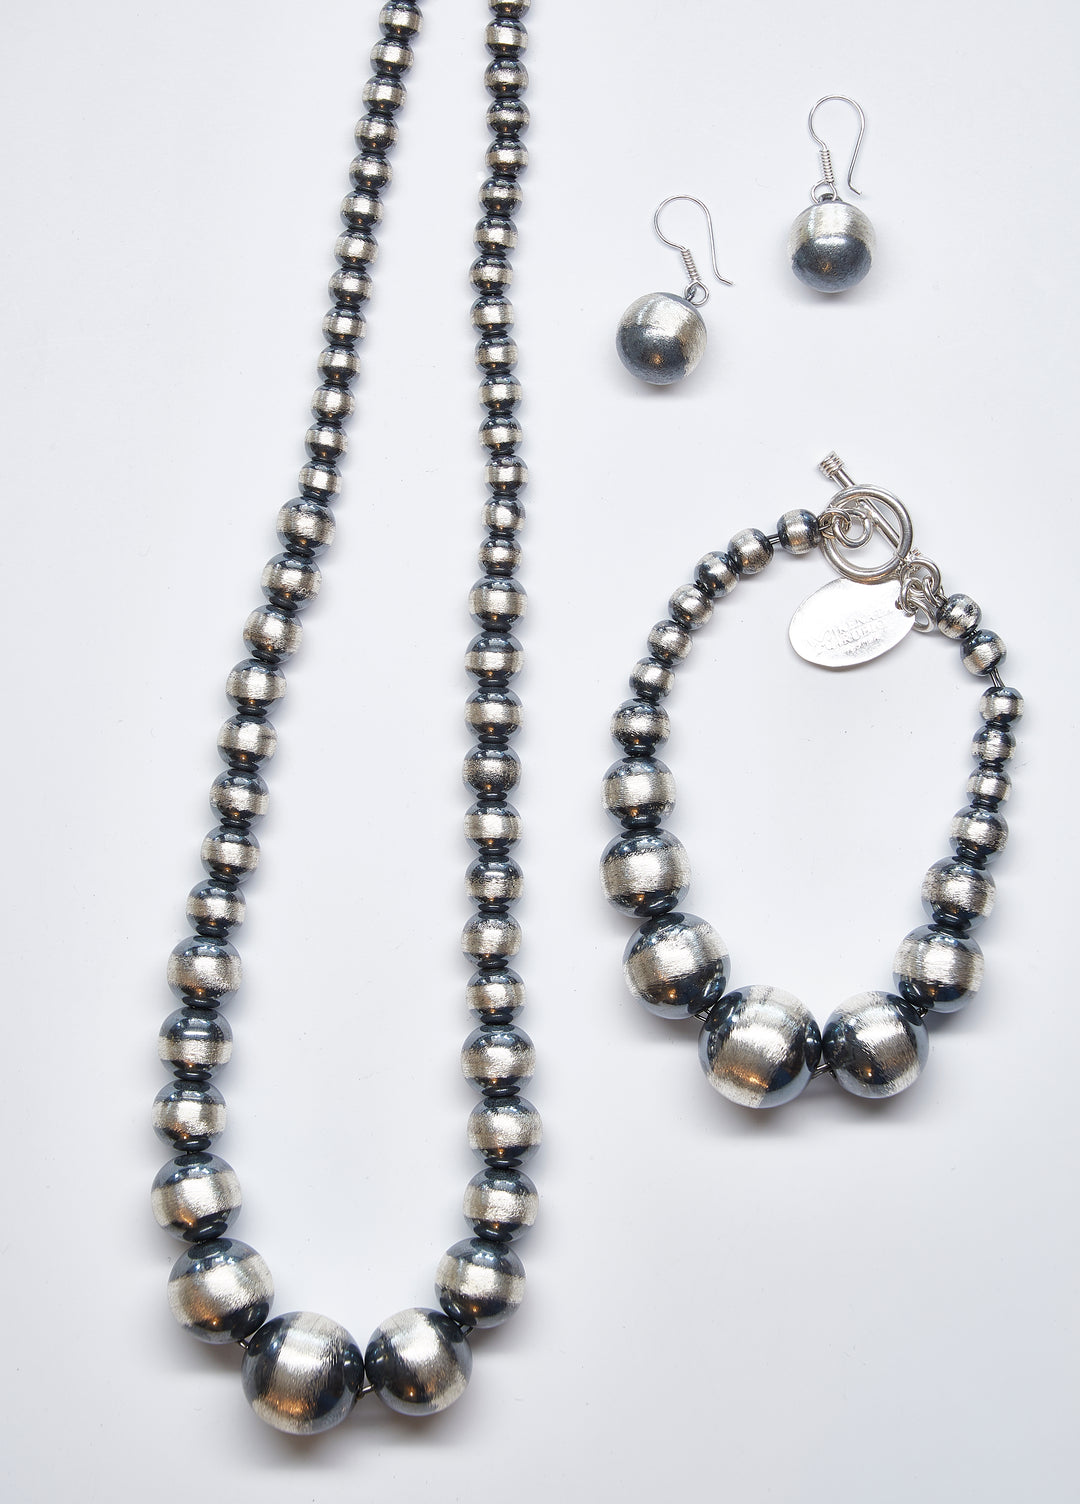 Set of Graduated Oxidized Silver Beads